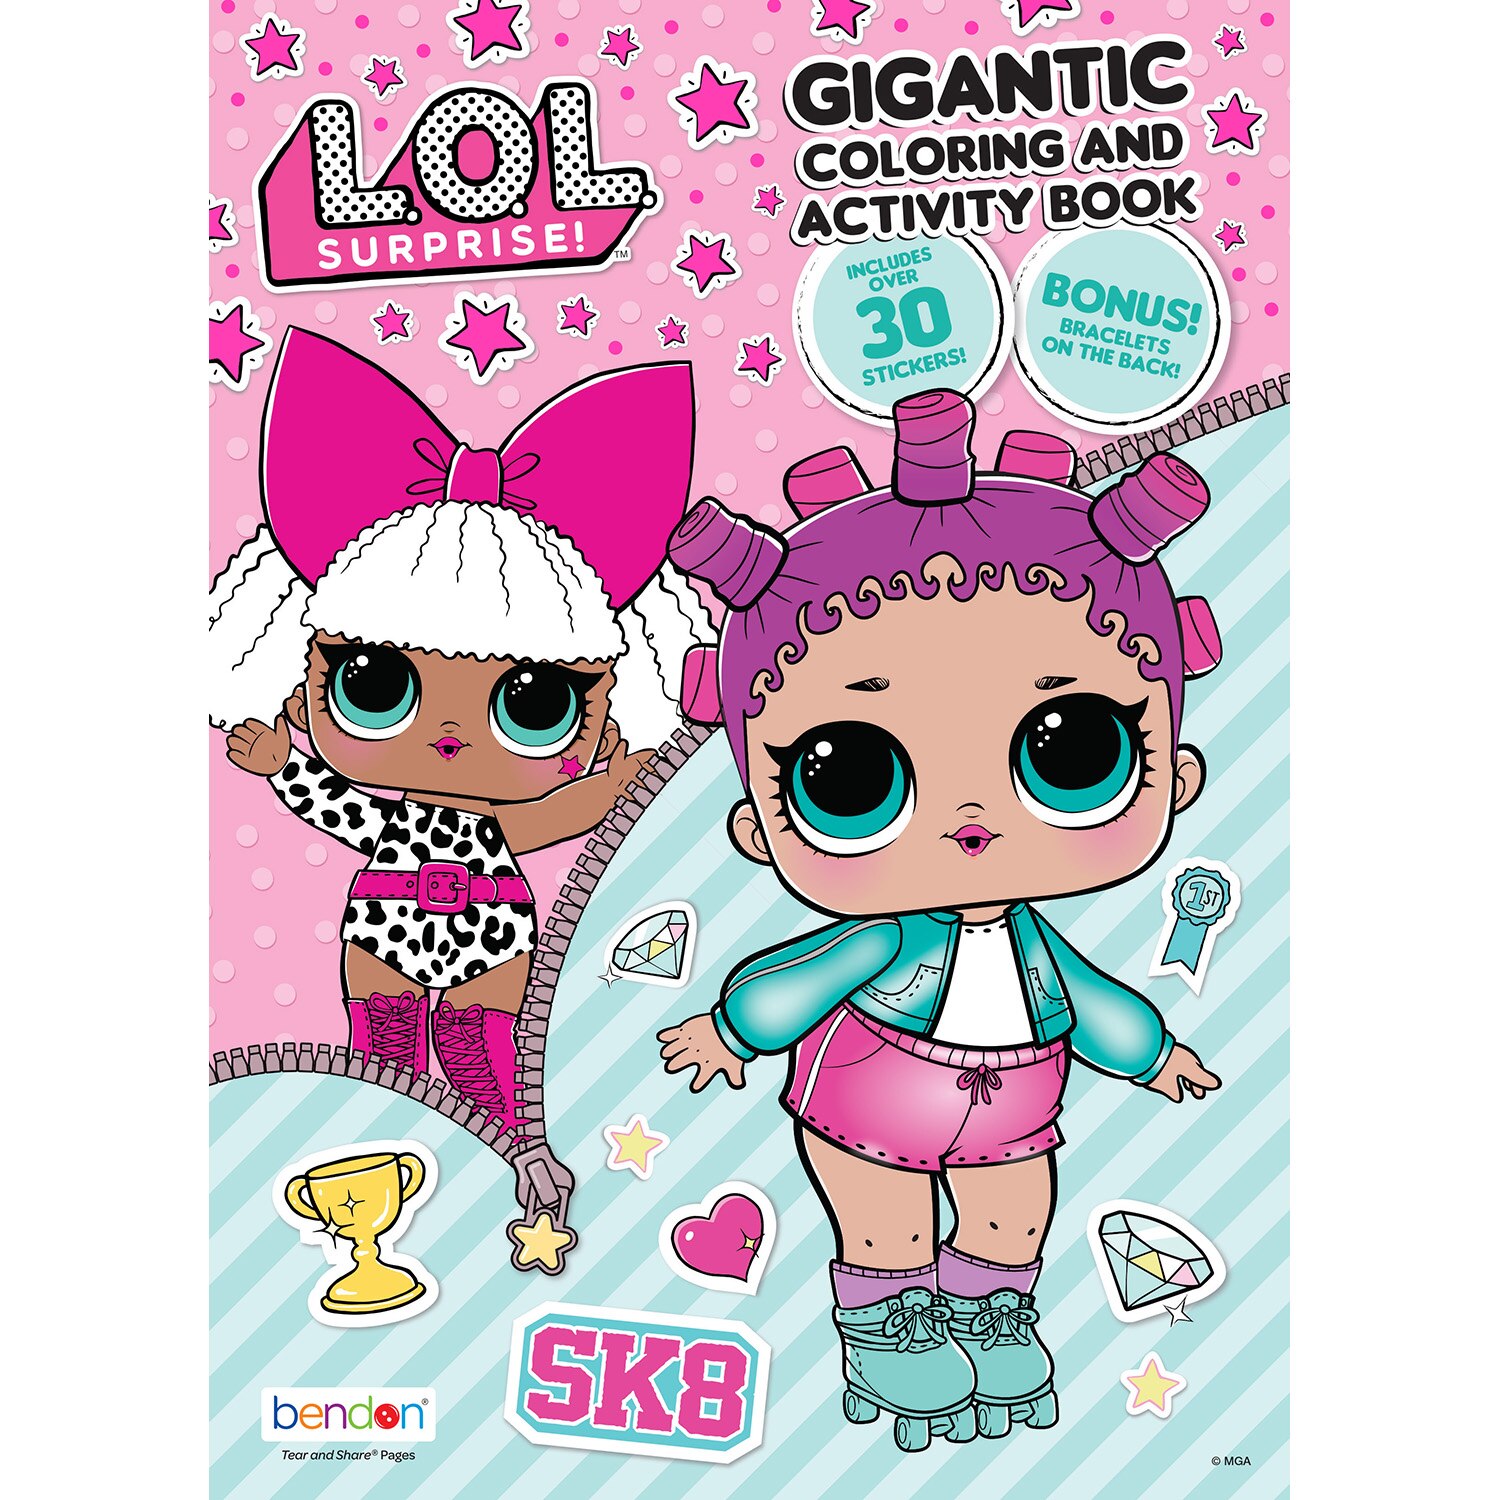 L.O.L. Surprise! Gigantic Coloring and Activity Book